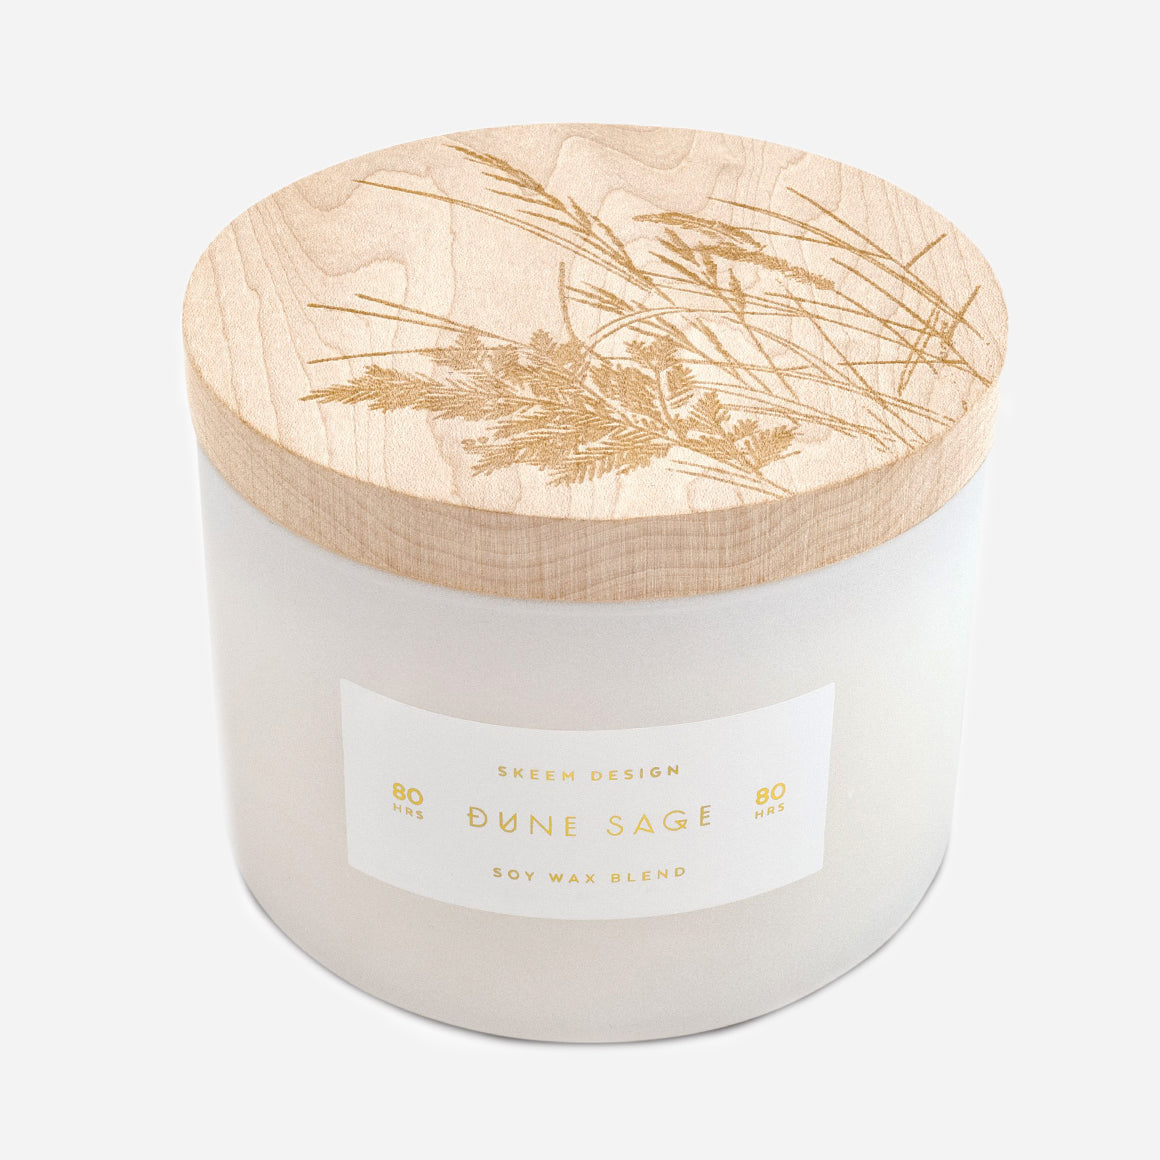 Dune Sage Soy Wax Blend Candle